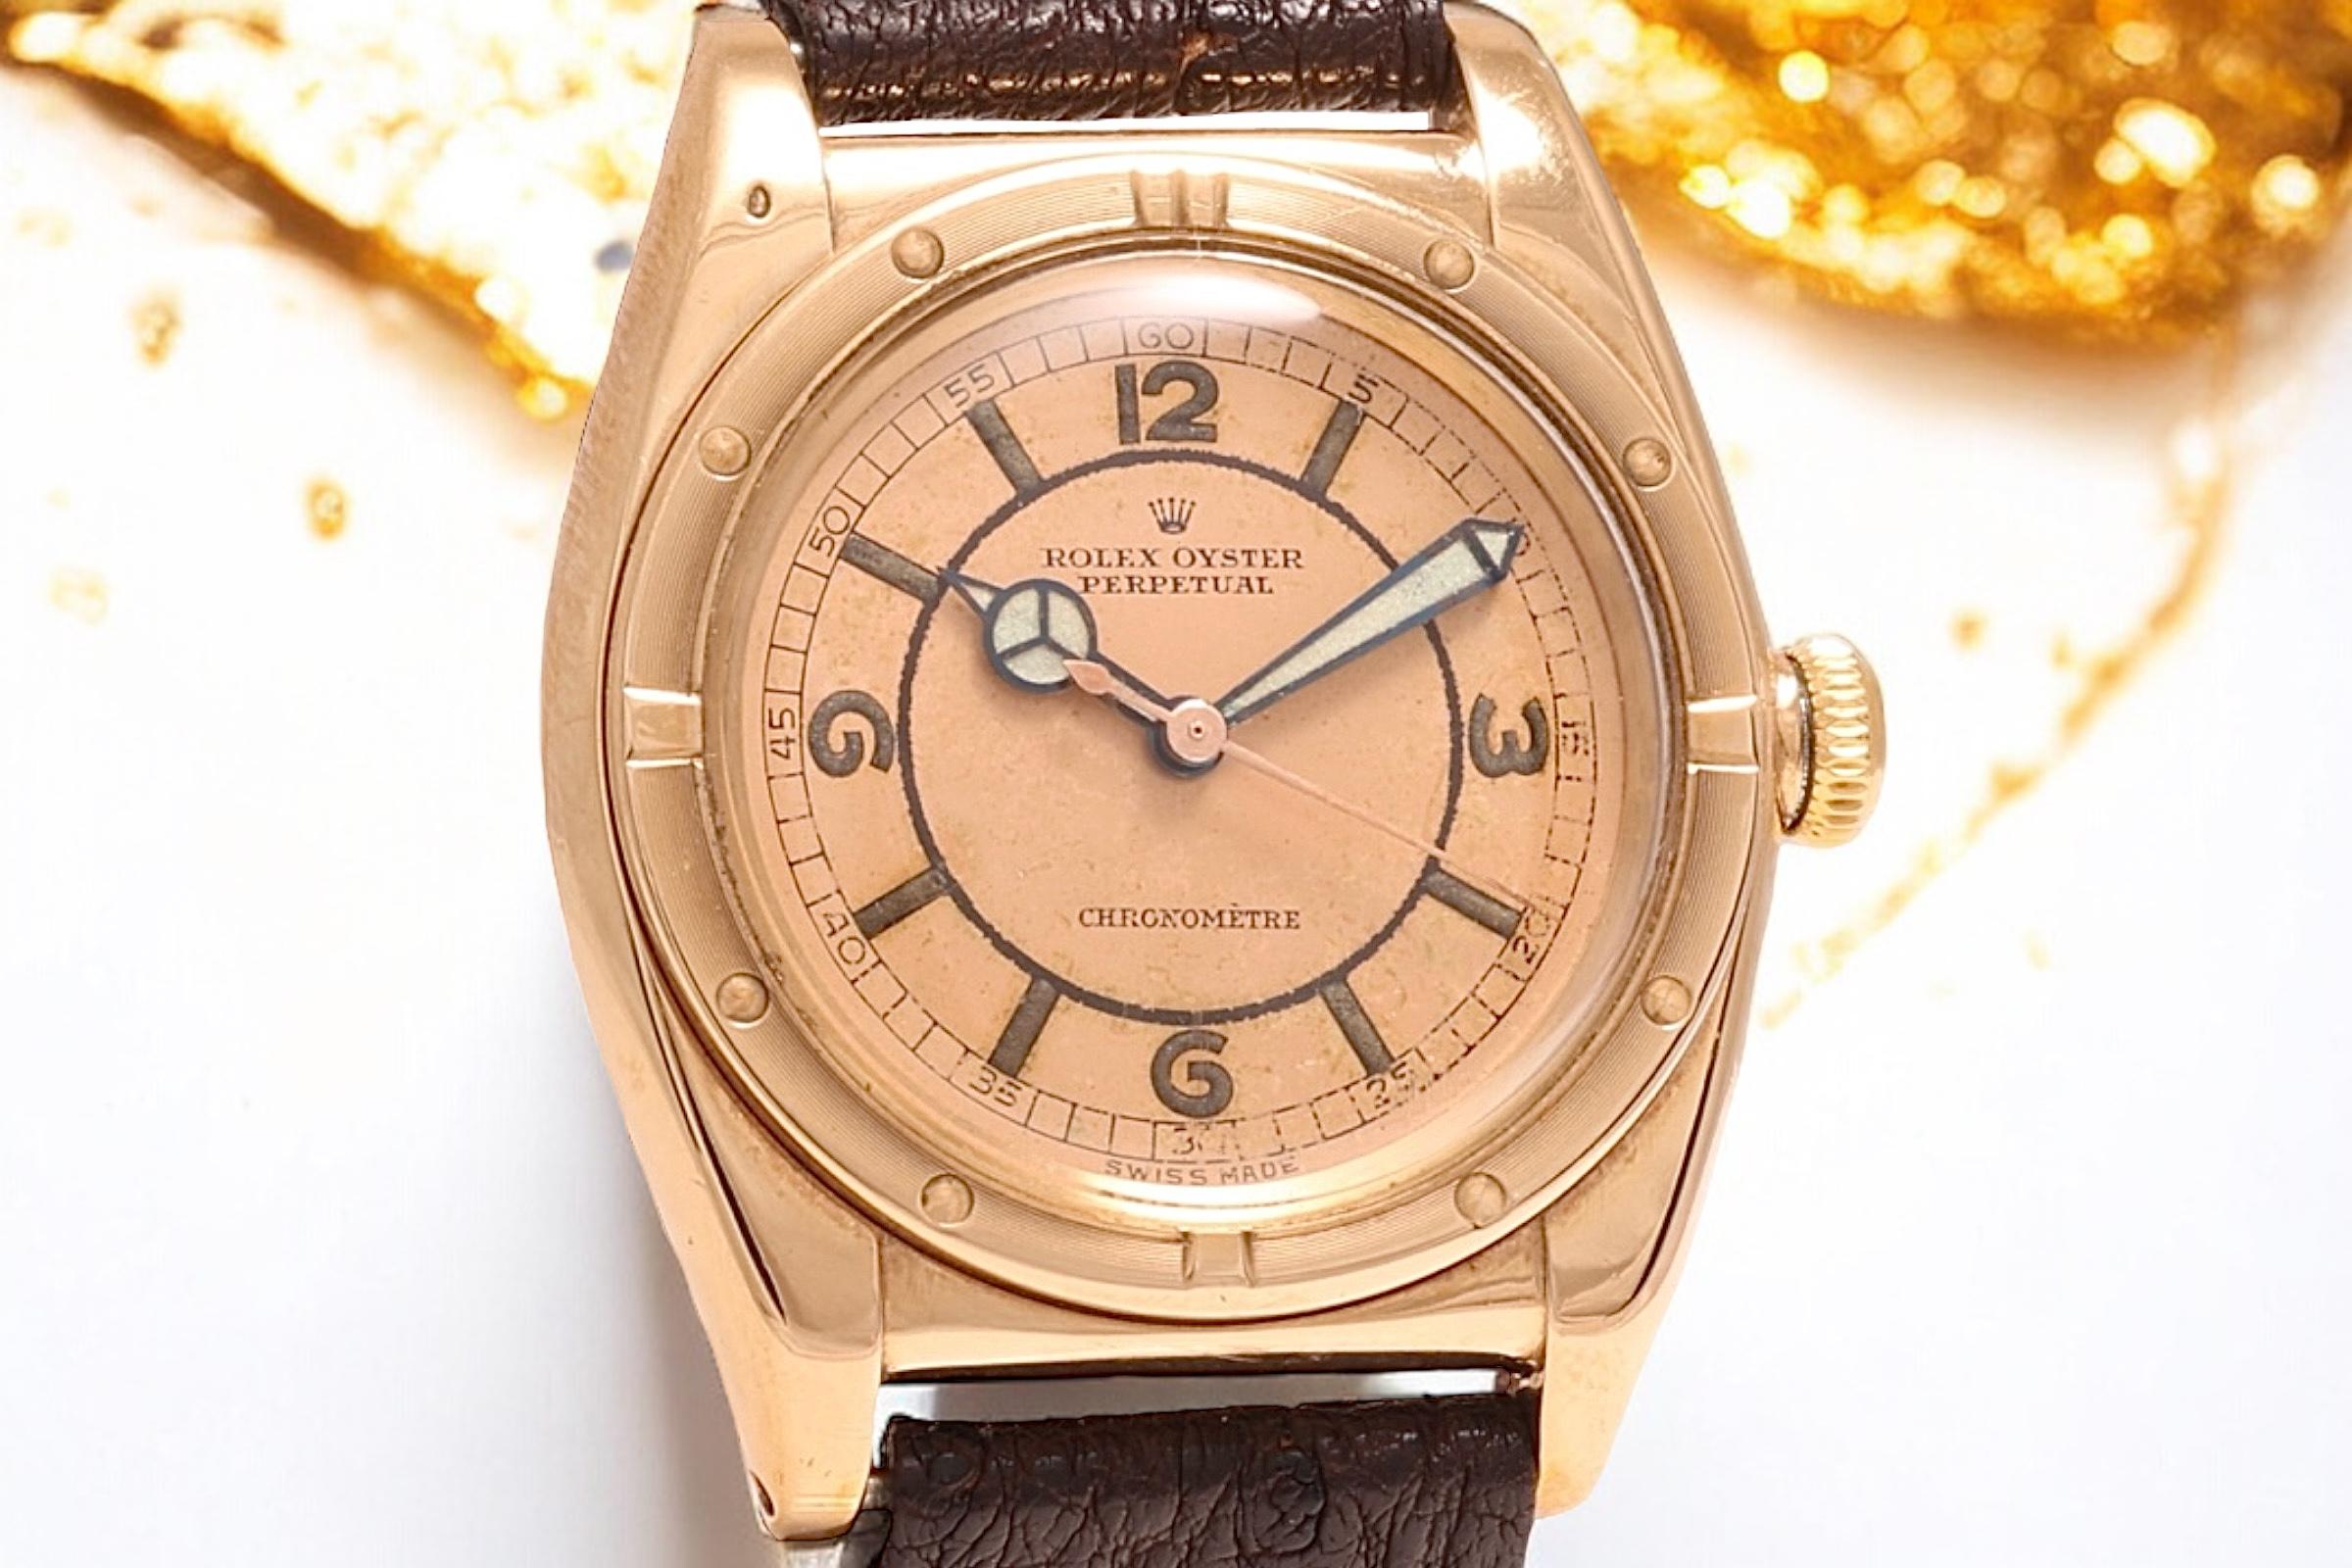 Pink Gold & Stainless Steel Rolex Chronometre Bubble Back Automatic Wrist Watch 6